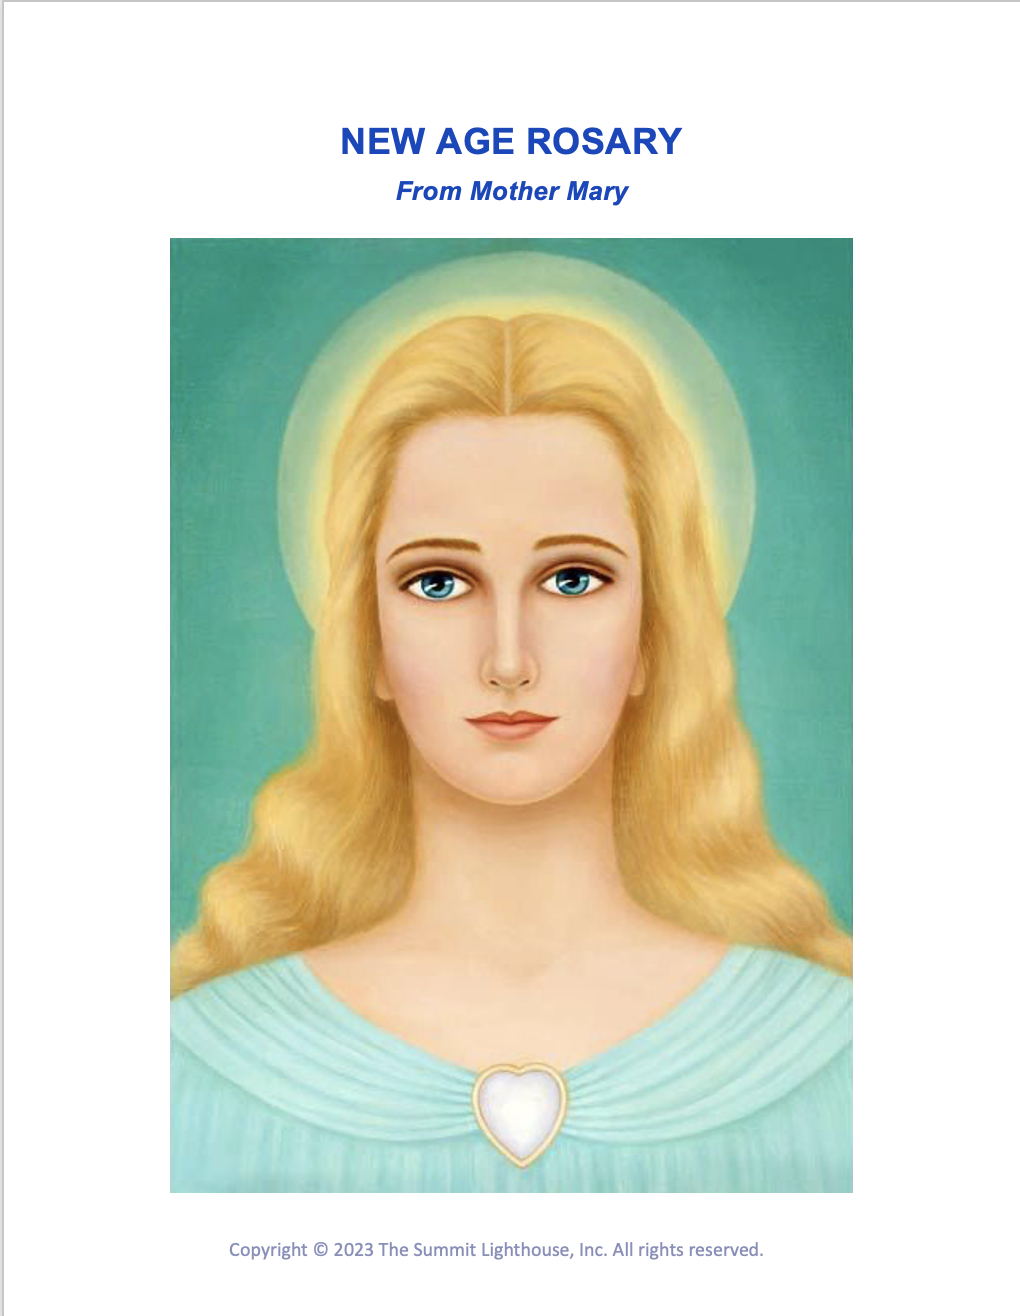 Shows ascended lady master Mother Mary.